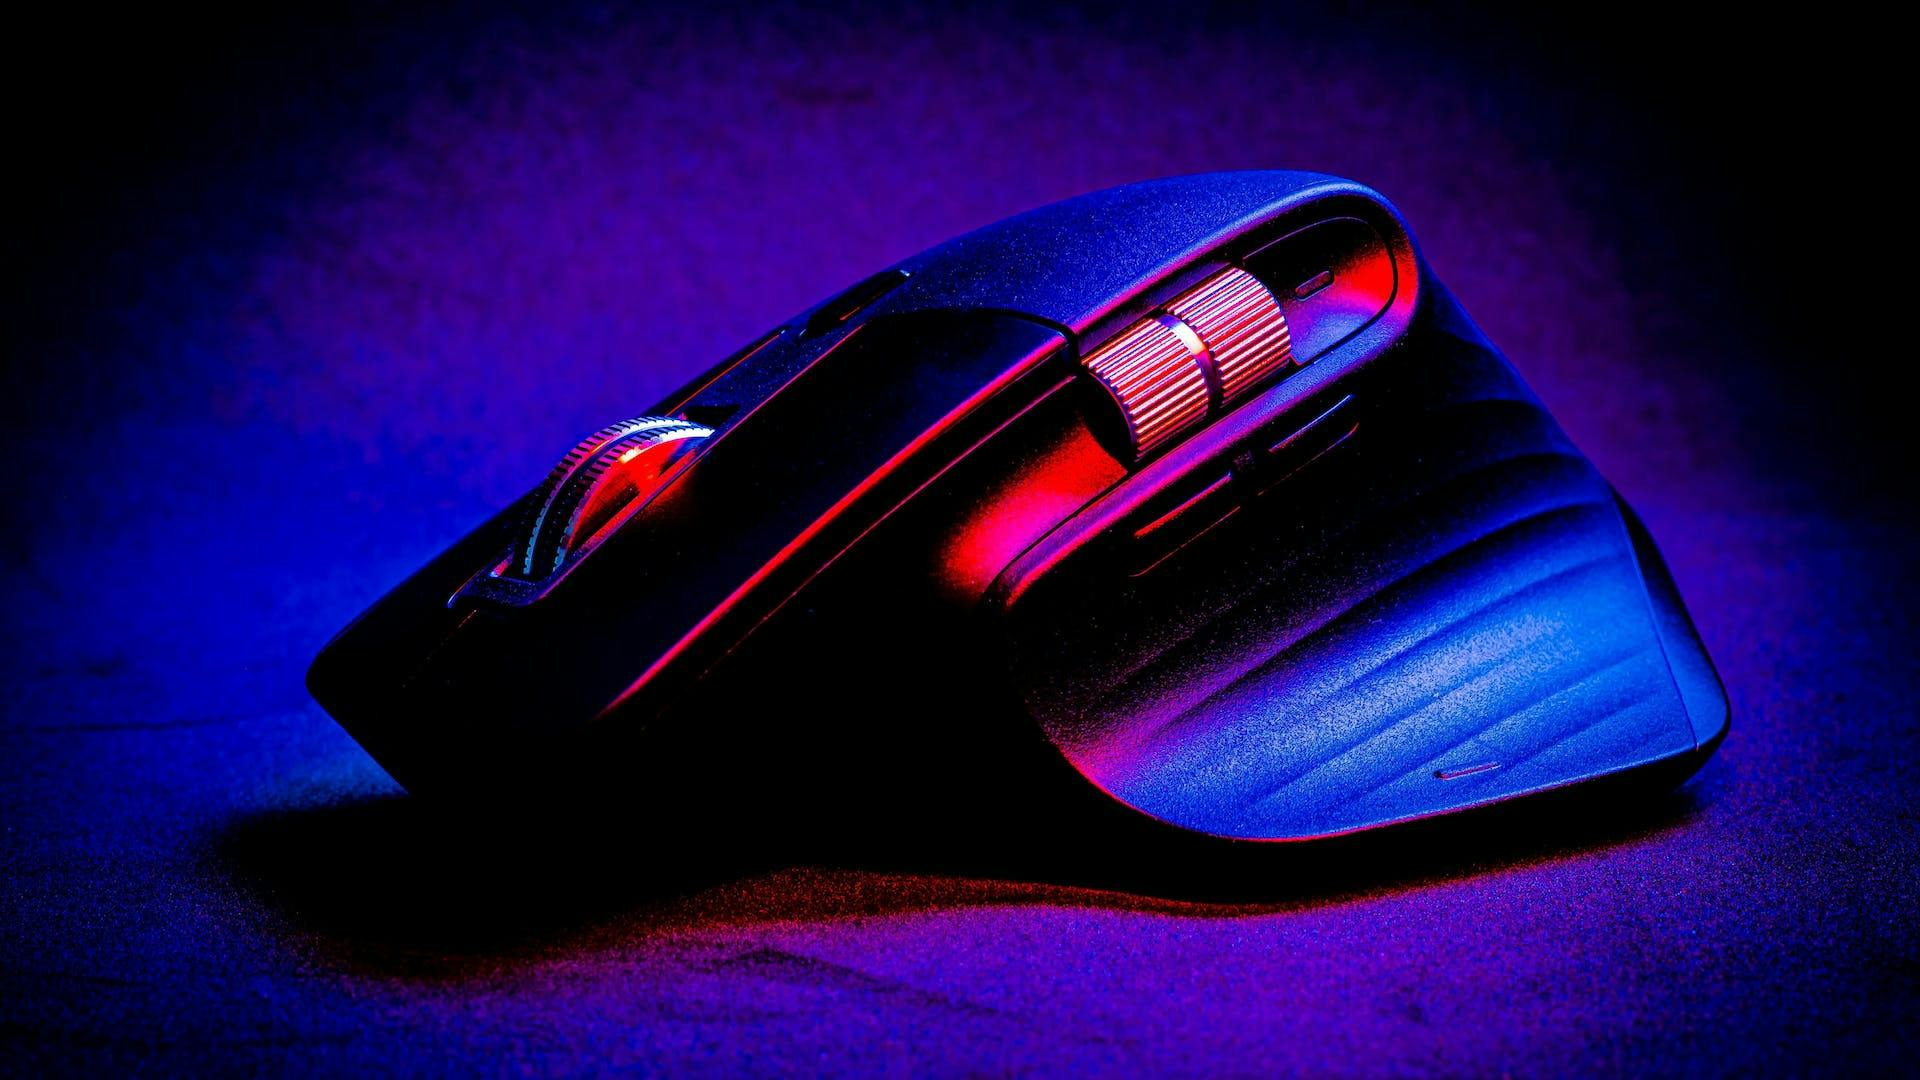 A red and blue glowing, wireless and unusually shaped LED gaming mouse with mouse wheels on the side